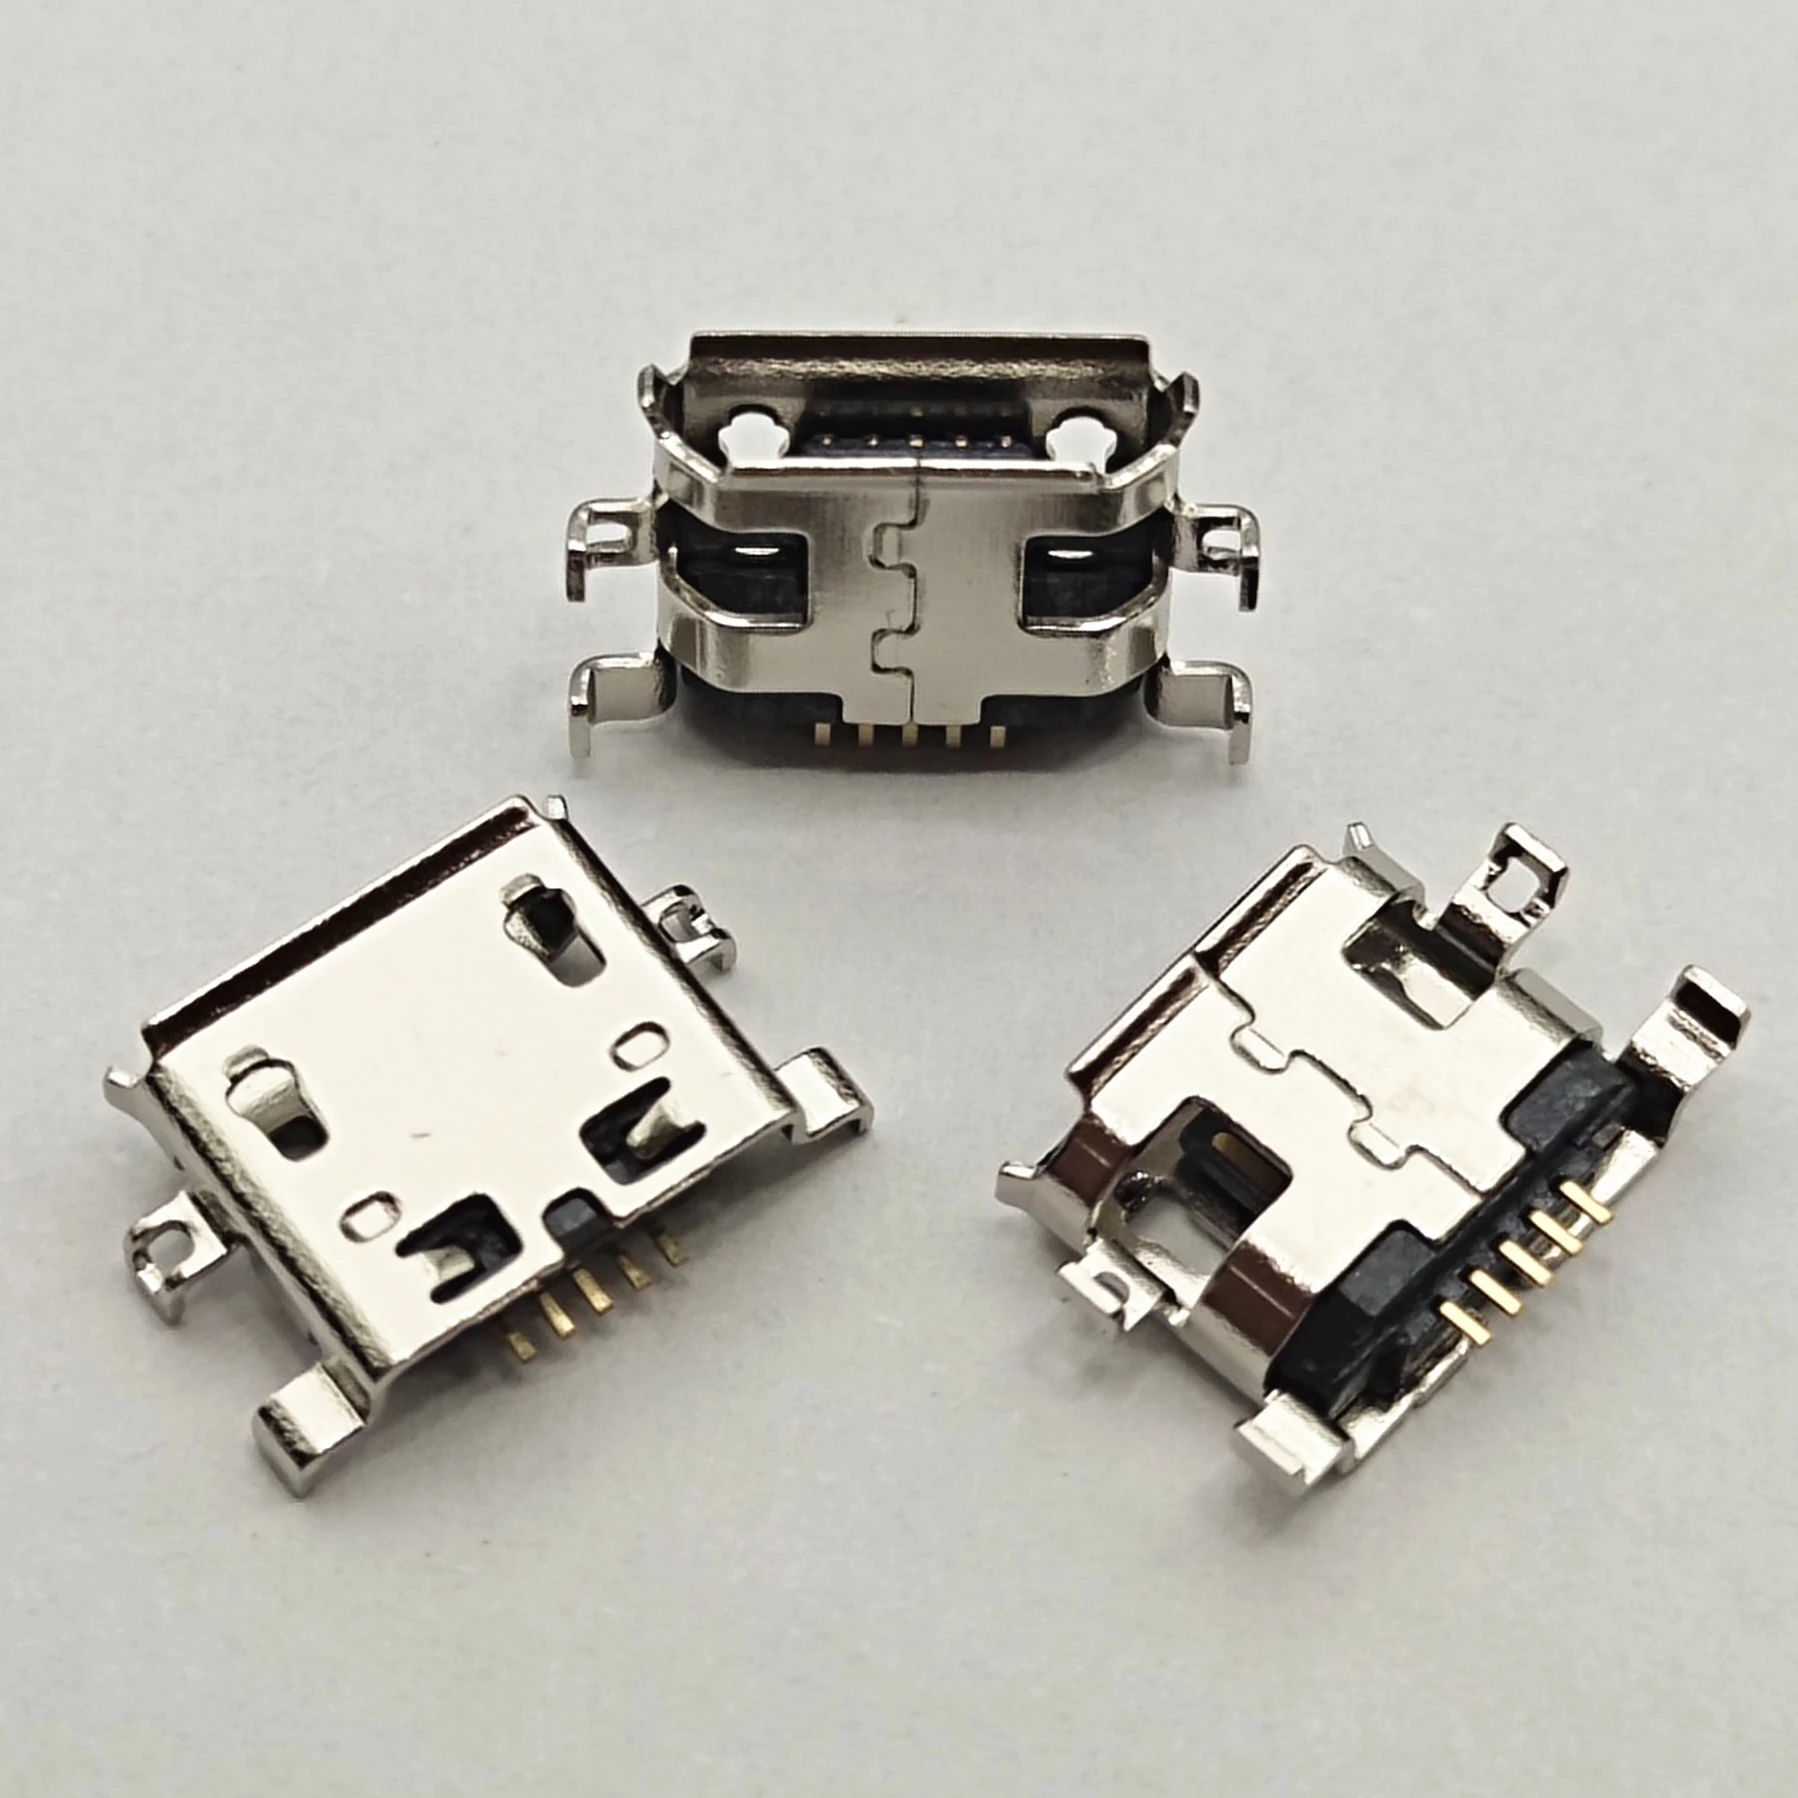 10-100pcs Micro USB Connector 5pin Mid Mount 0.8mm charger Charging Upturned Port Dock socket For ZTE N880S U880 V880 C8650 P700 chenghaoran universal dropship 15model micro usb 5pin jack connector v8 port horn charging socket for lenovo huawei zte htc etc